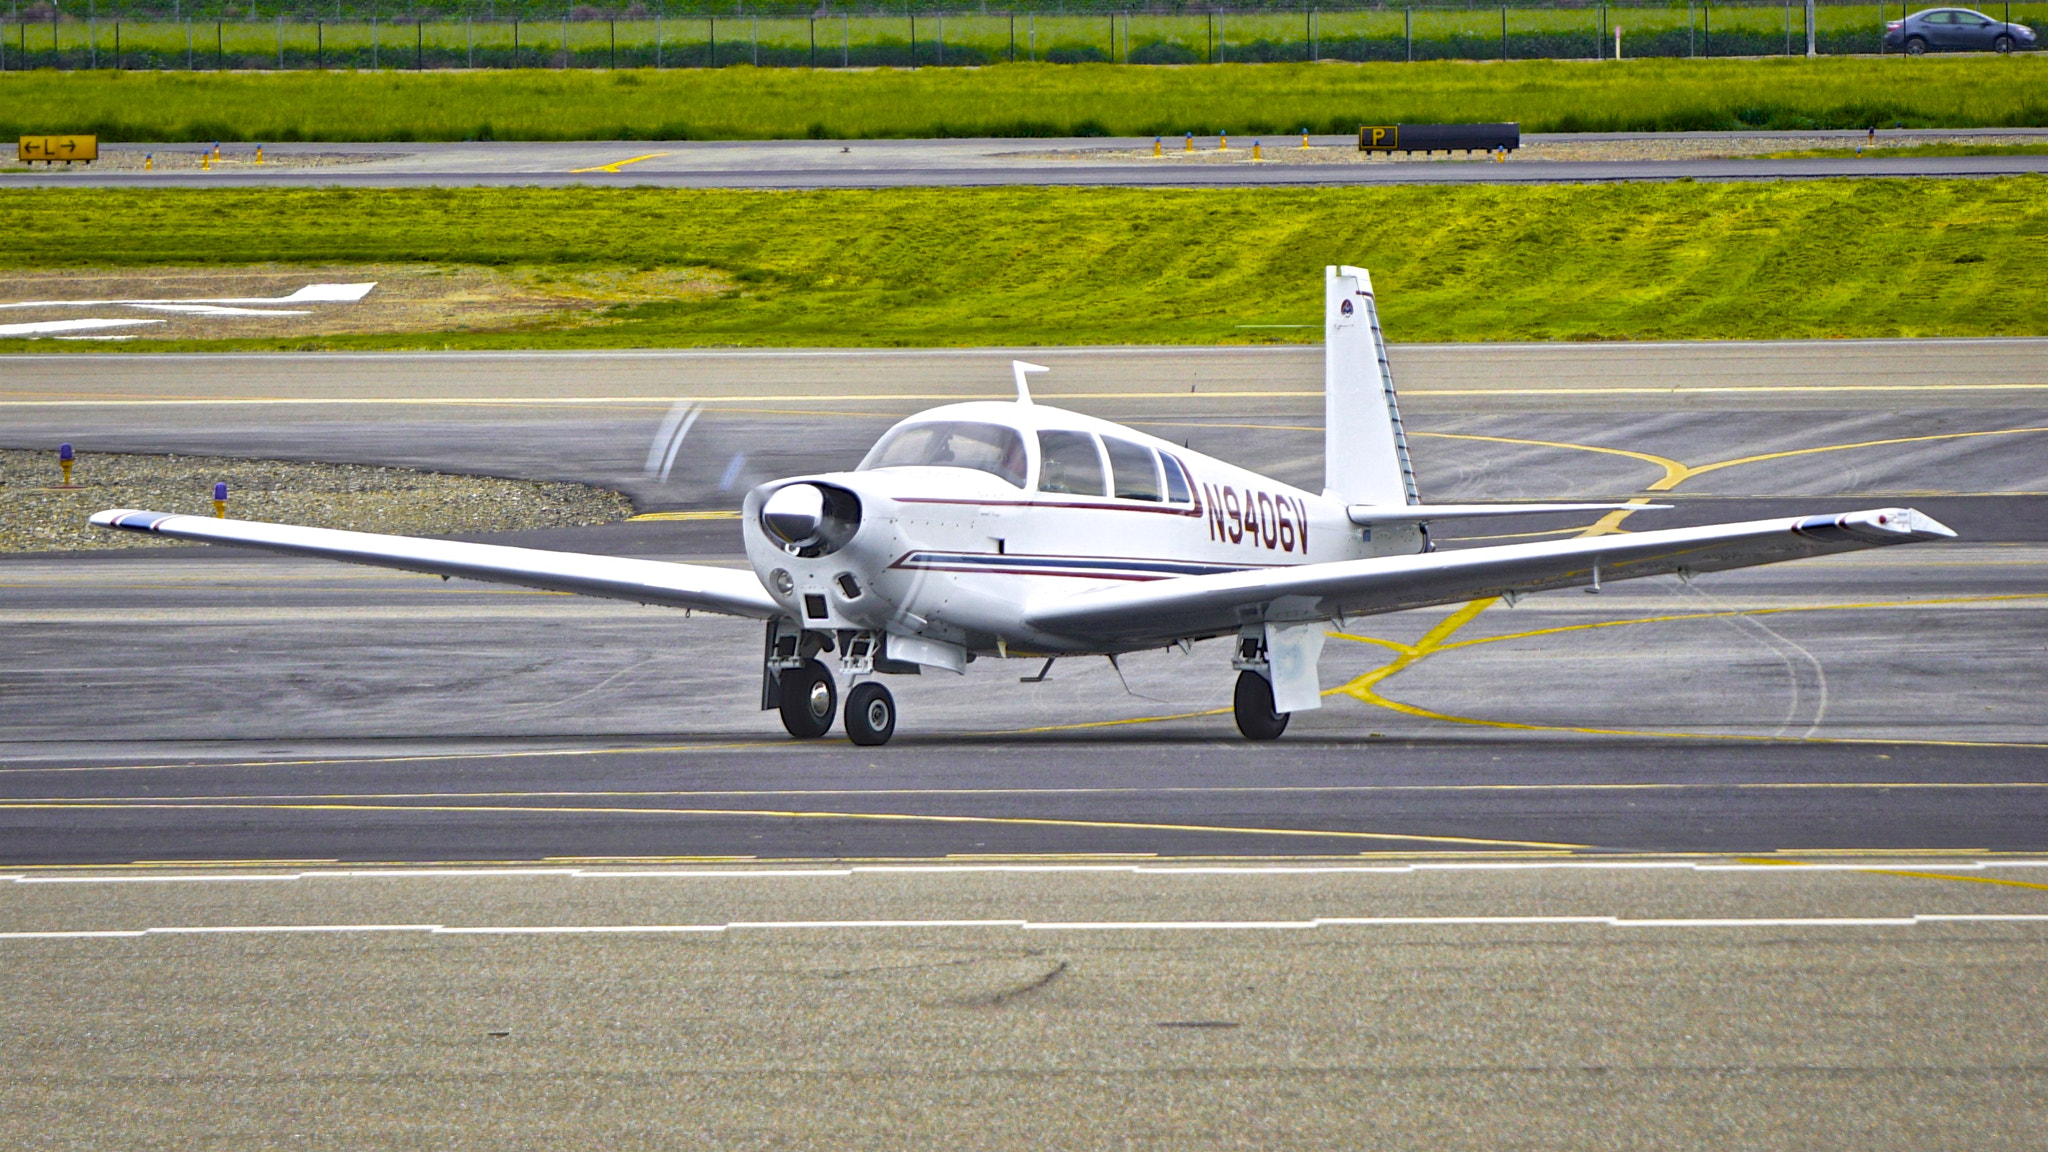 Sony a6000 sample photo. 1969 mooney m20c n9406v c/n 700034 at livermore airport in california. 2017. photography